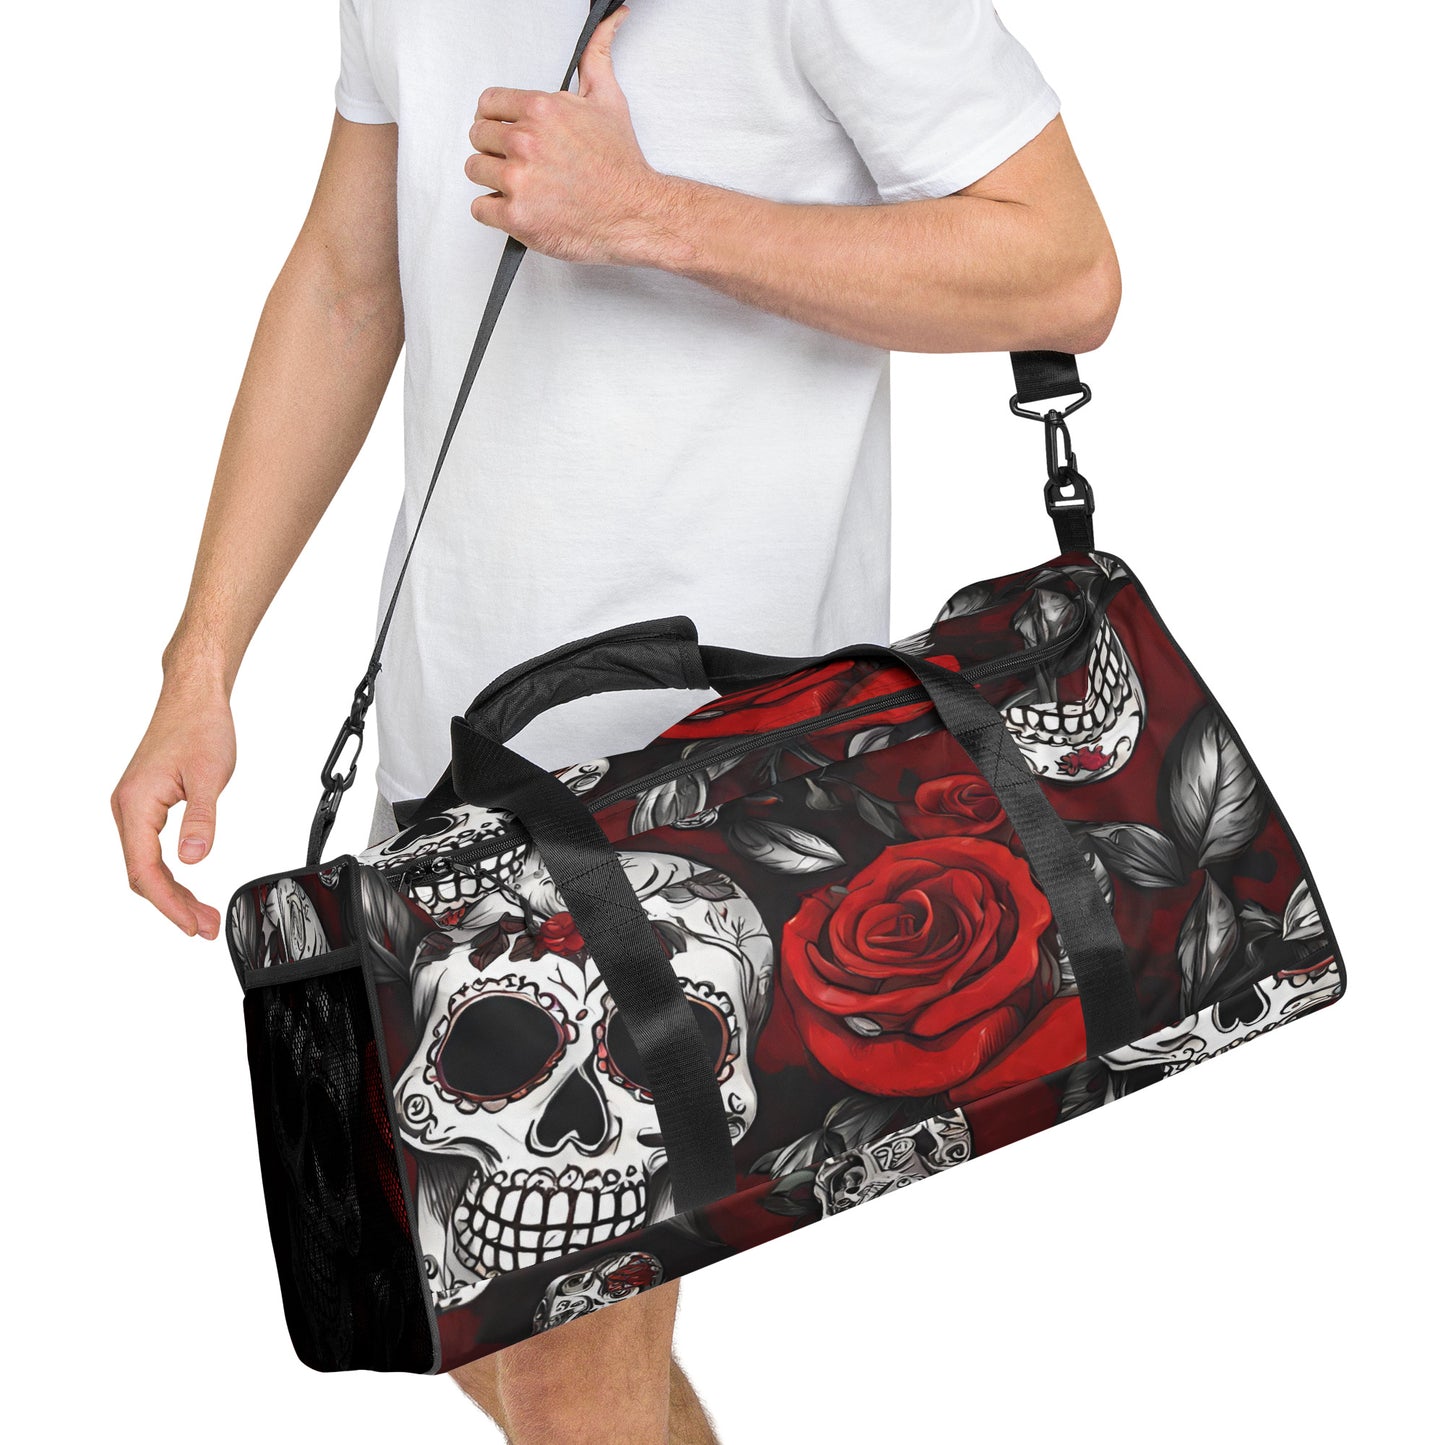 DAY OF THE DEAD LARGE DUFFEL BAG